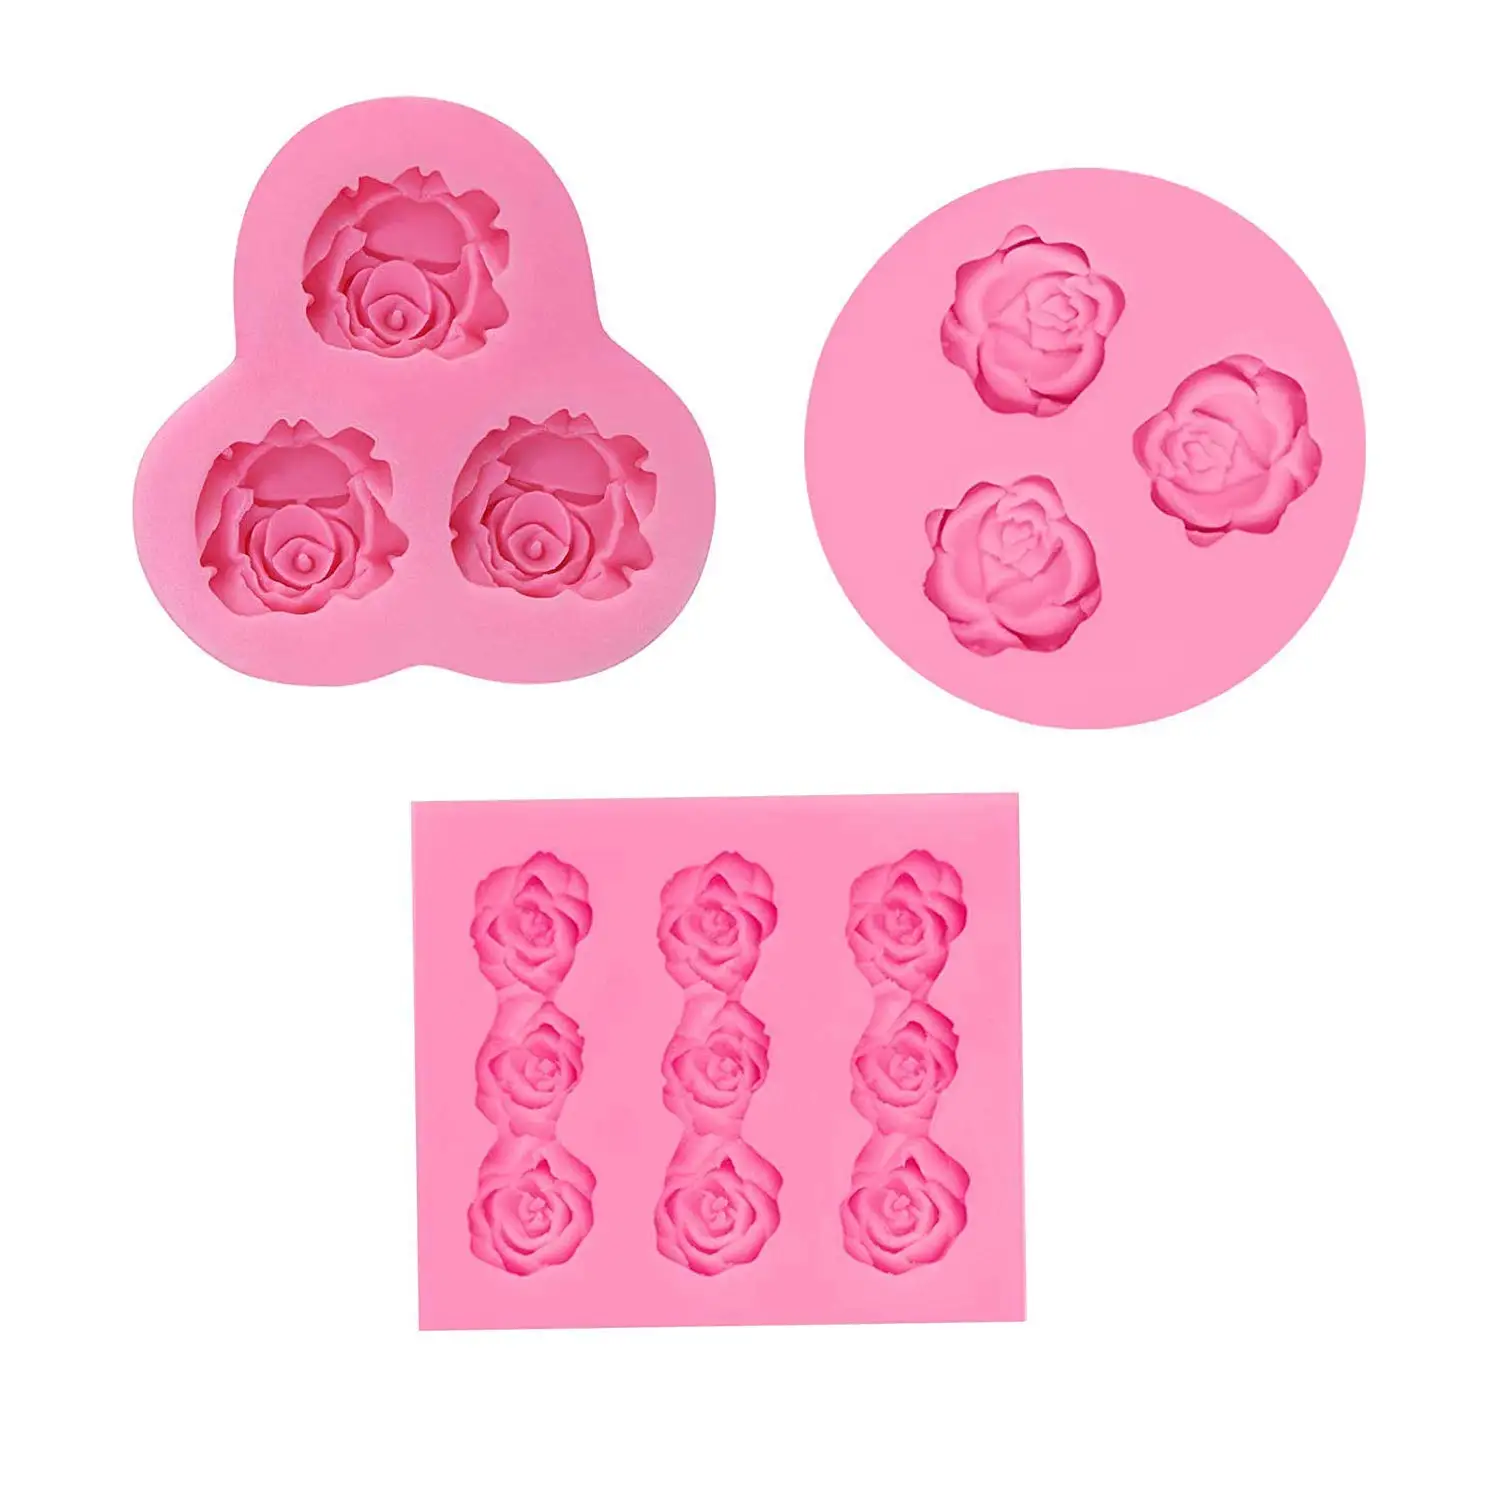 Flower Cake Fondant Molds 5 Pack Rose Flowers Heart Silicone Molds Flower Daisy Mold for DIY Cake Decorating Soap Clay Fimo Chocolate Sugar Small Craft Molds 